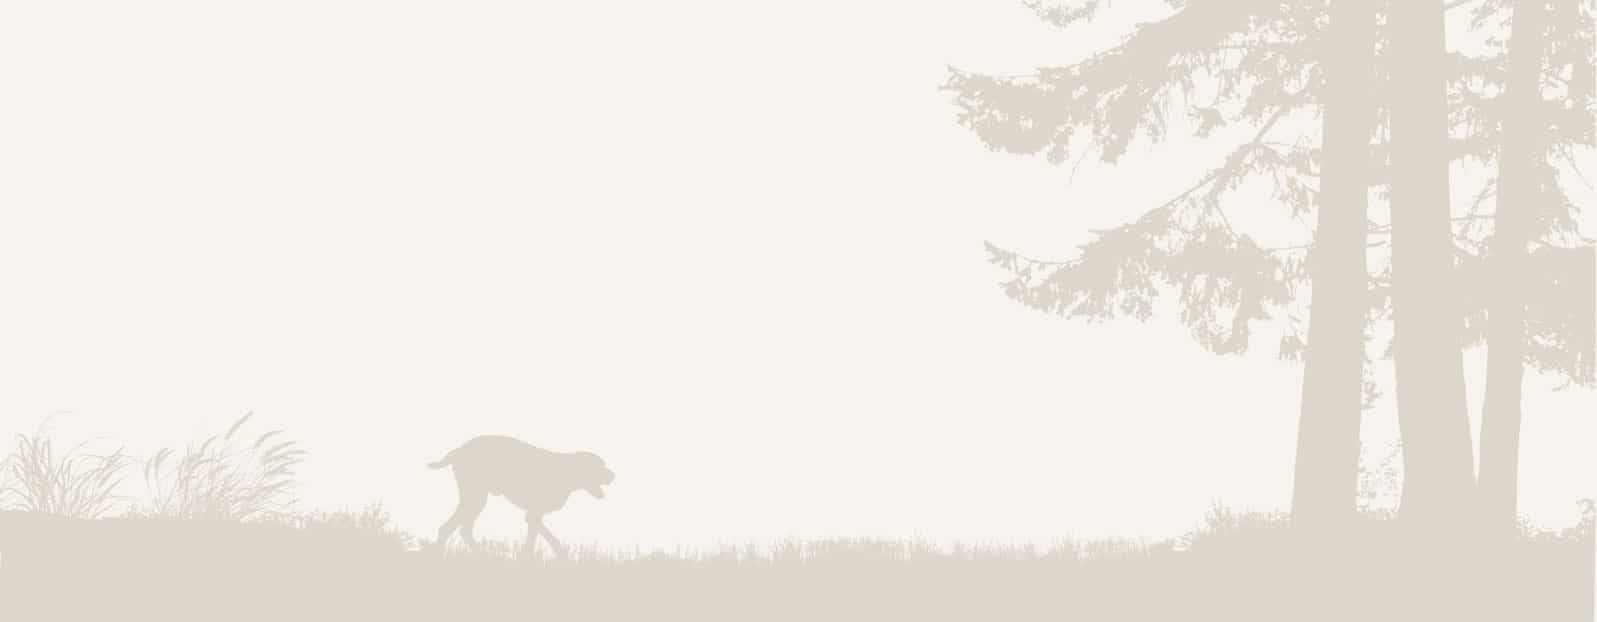 Outline of a hunting dog running through a field with woods in the background